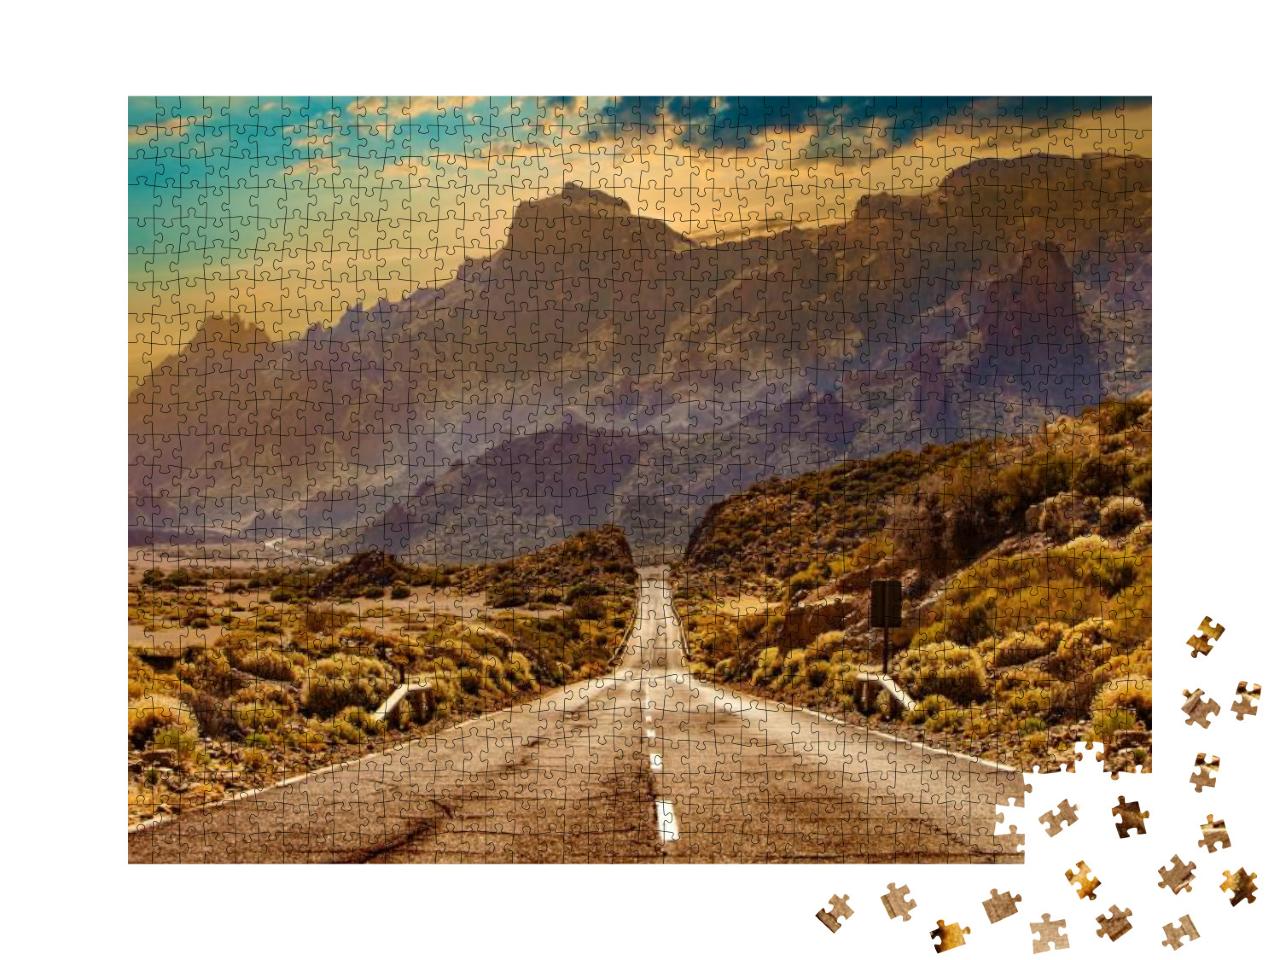 Image Related to Unexplored Road Journeys & Adventures. R... Jigsaw Puzzle with 1000 pieces